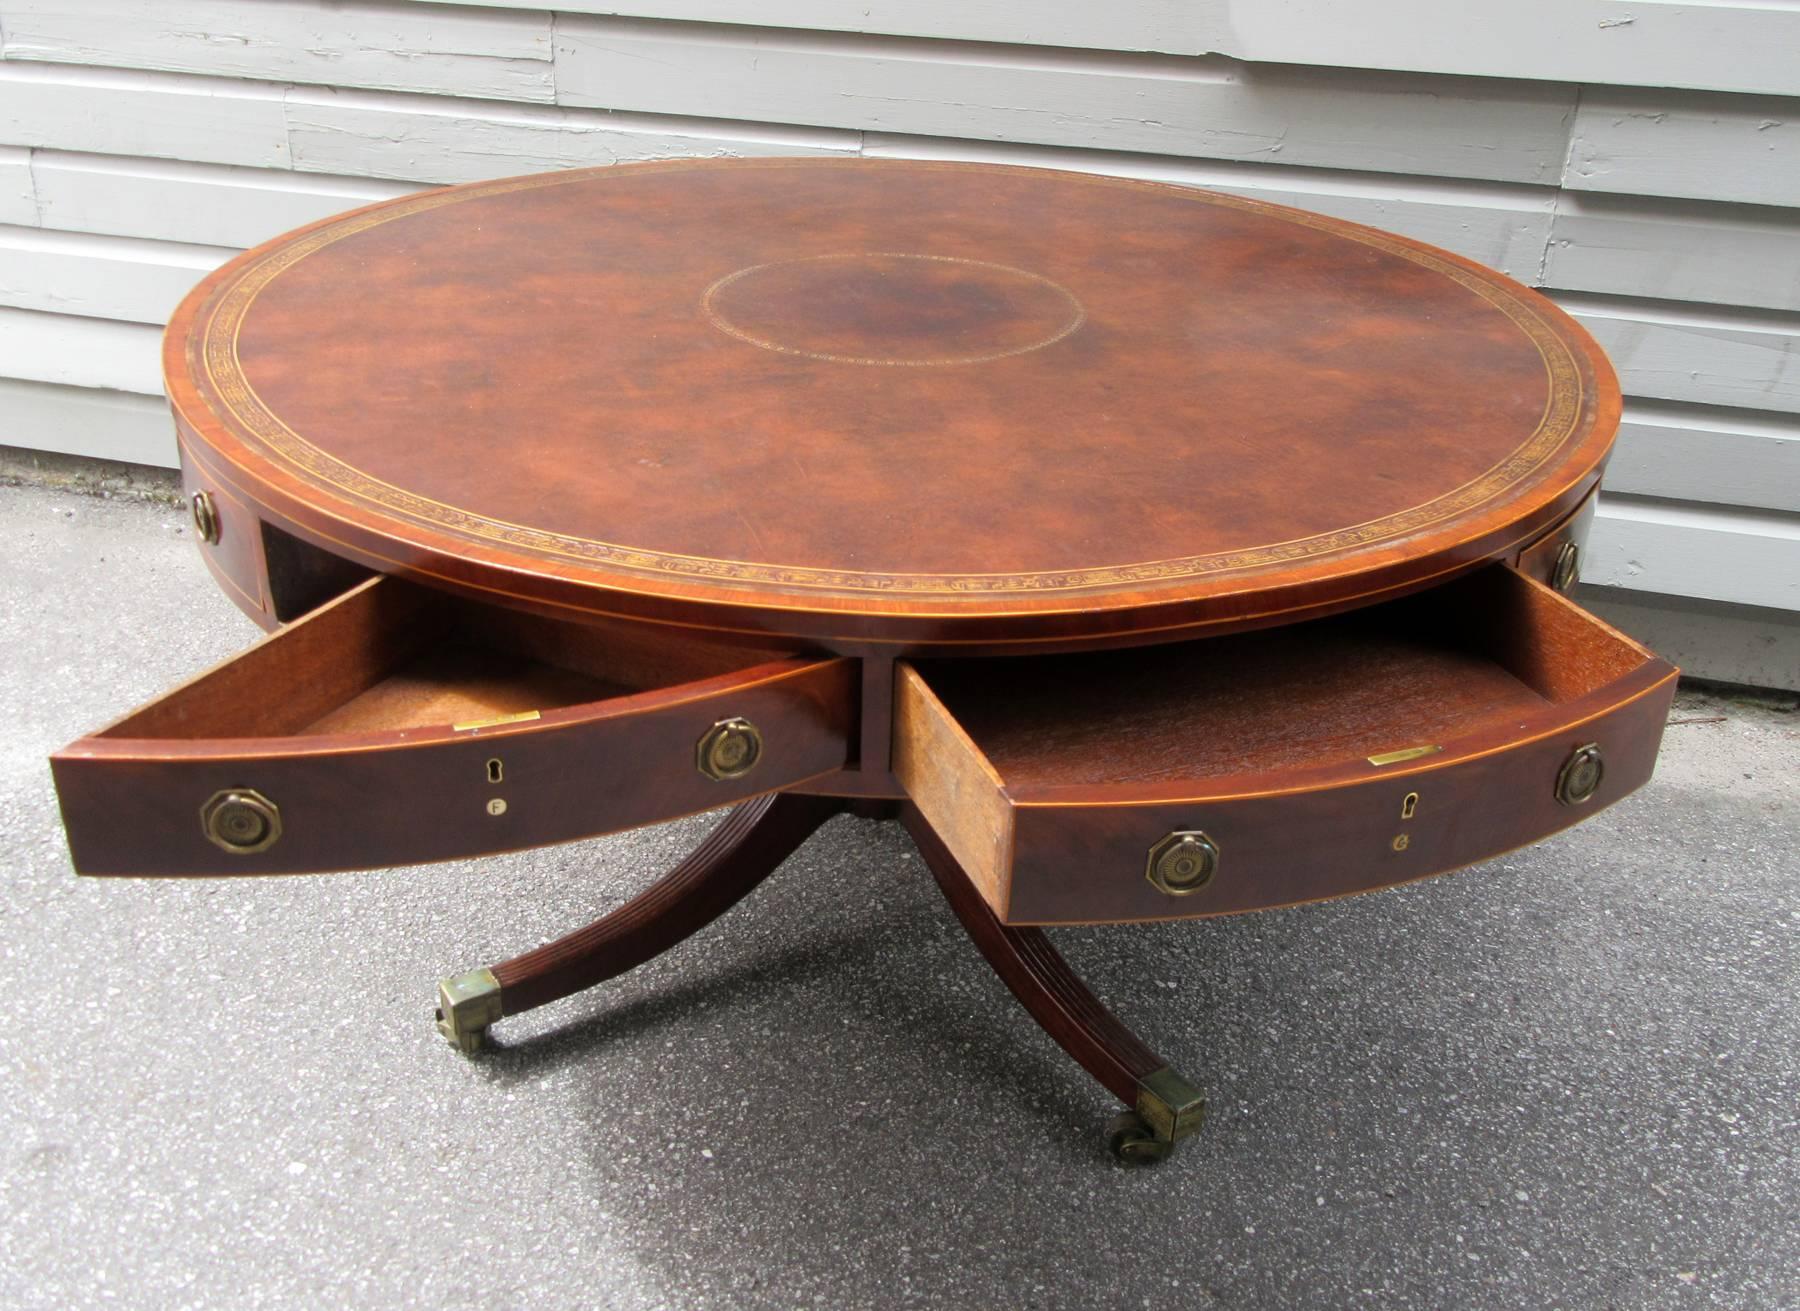 Early 19th Century English Regency Mahogany Rent Table with Embossed Leather Top 2